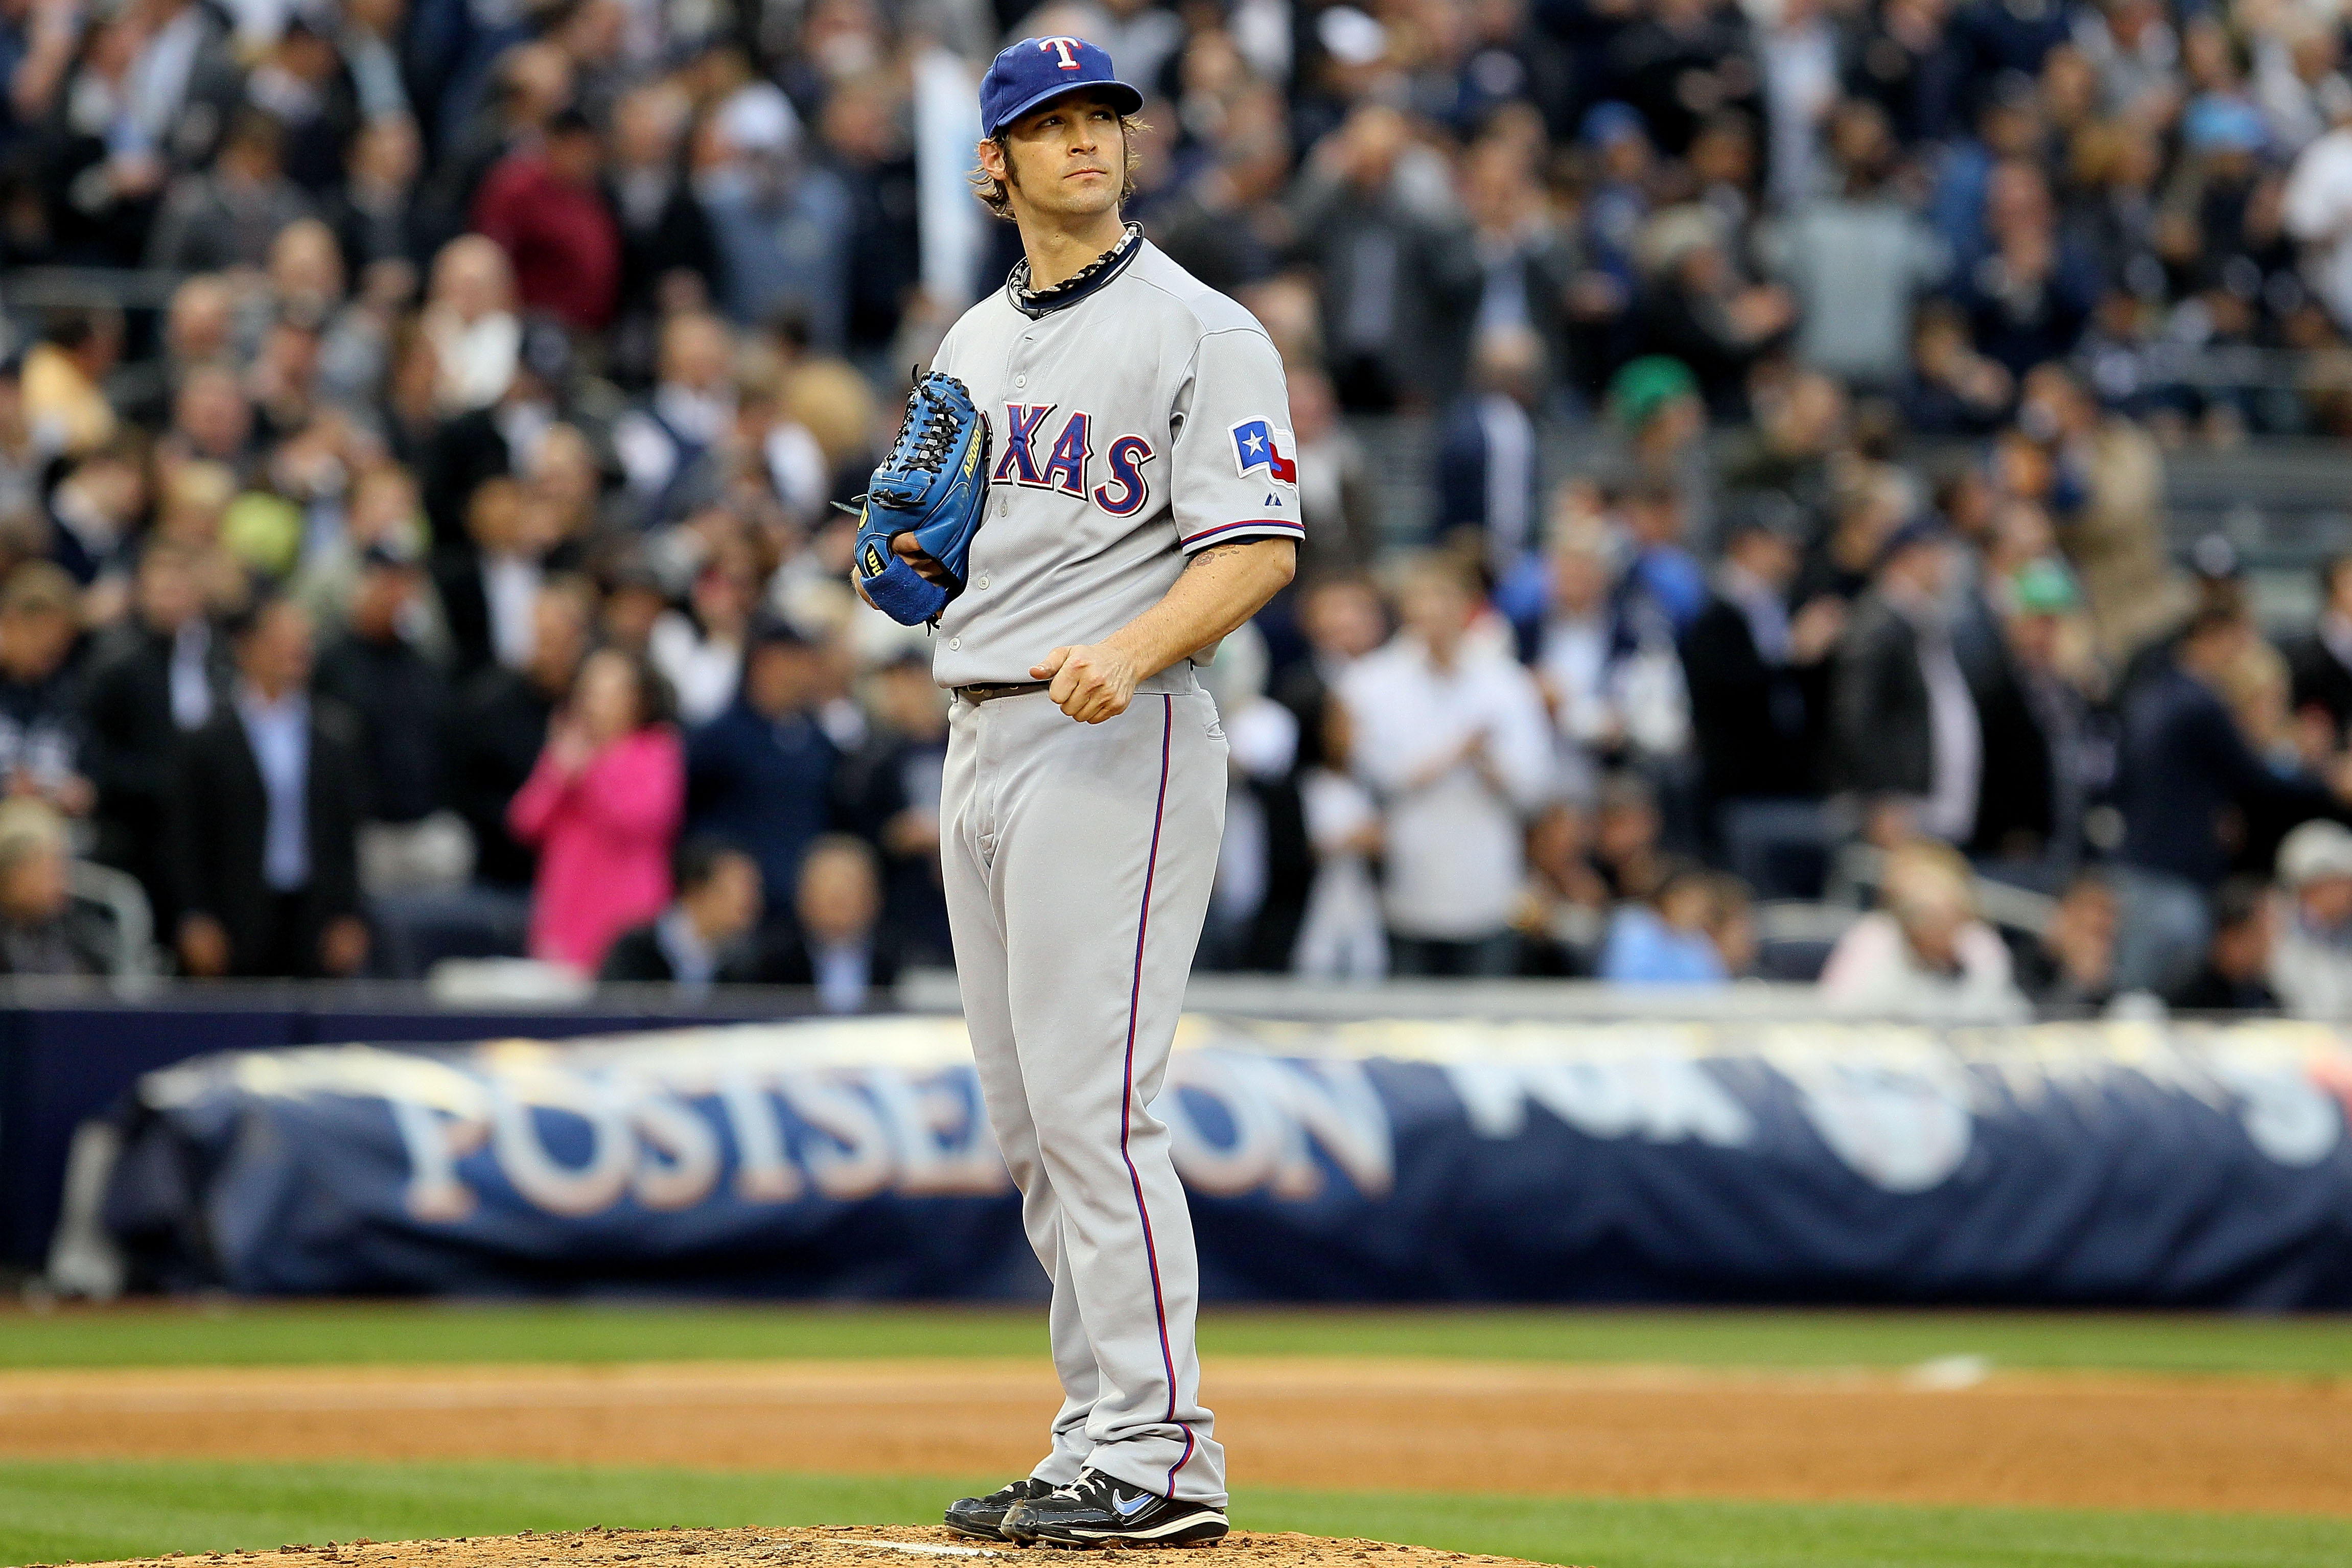 ALCS Game 5 Texas Rangers' Report Card After 72 Loss To Yankees